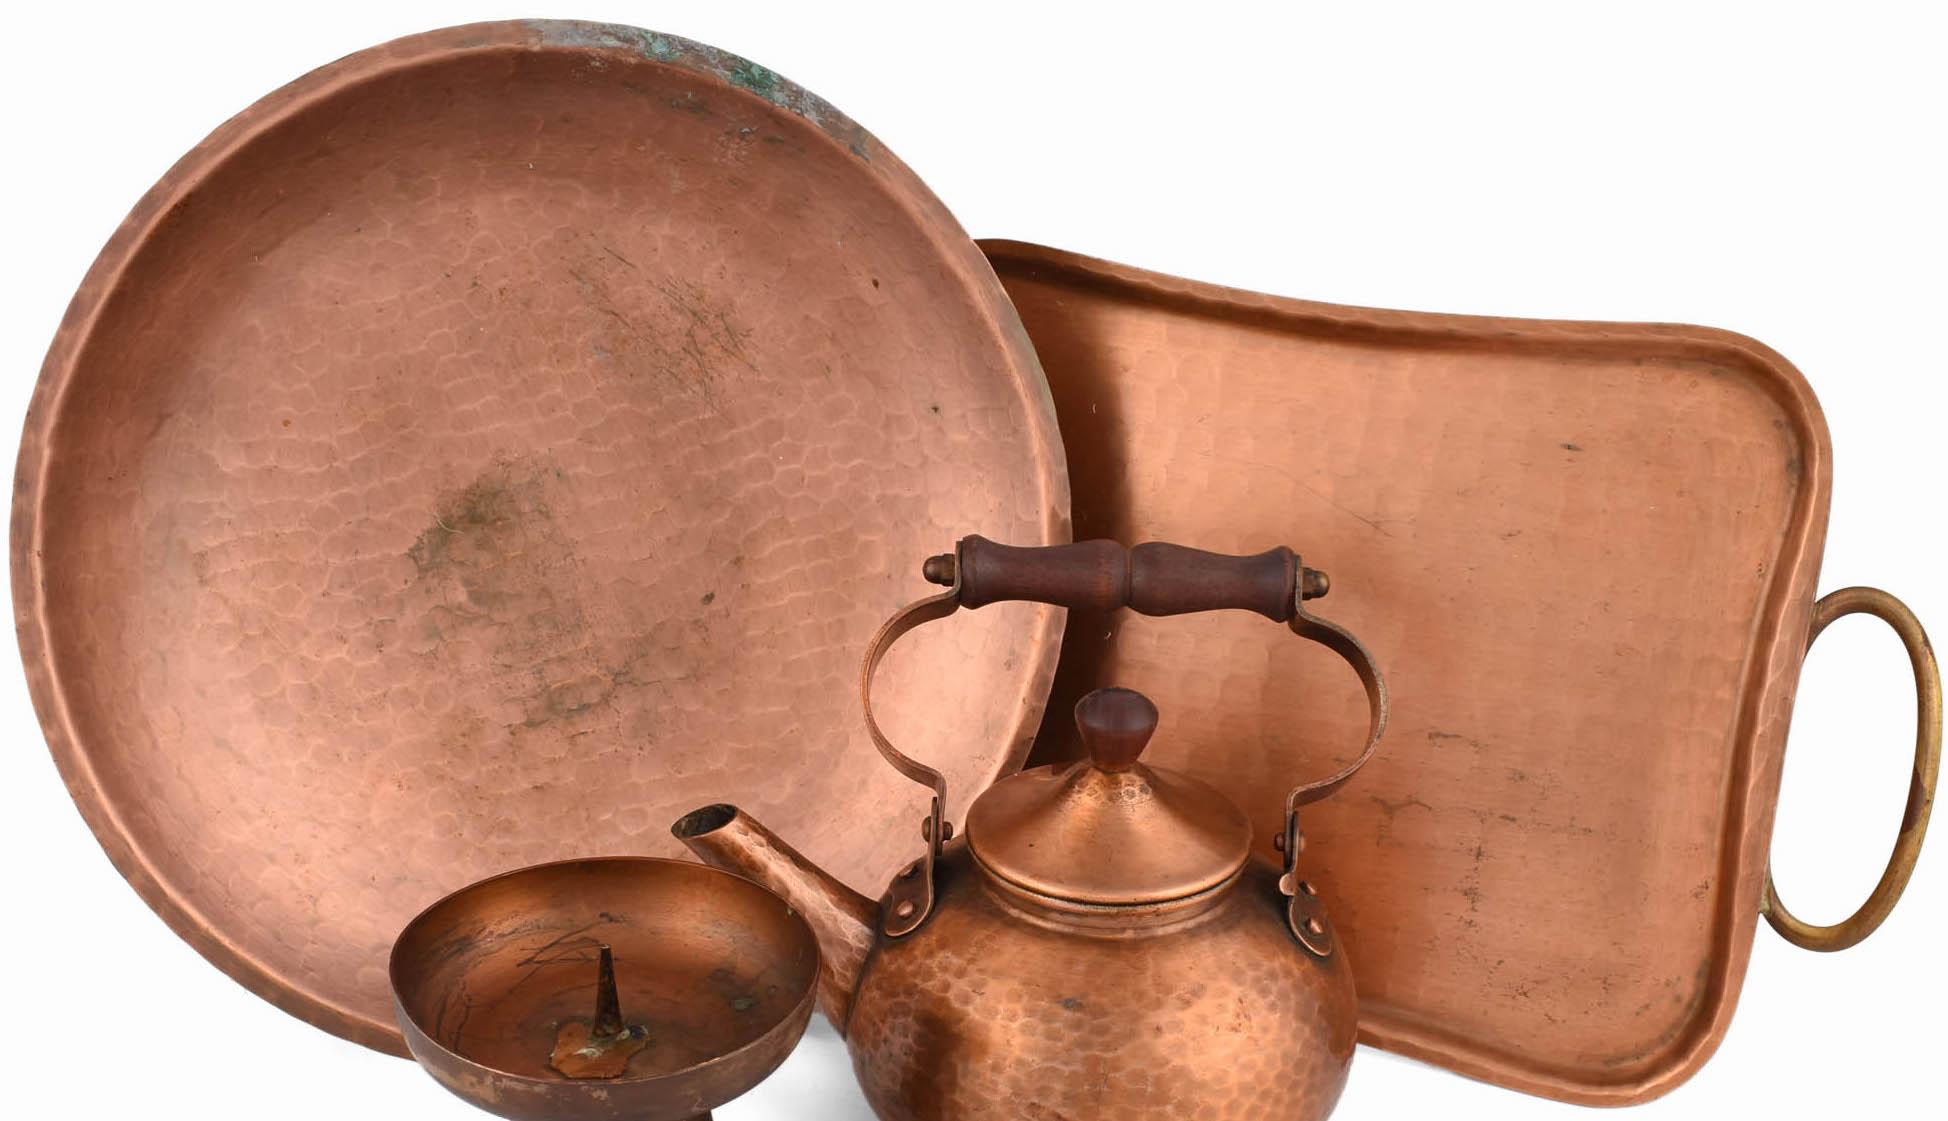 Eugen Zint copper set is an original group of objects realized in the 1950s.

Original copper objects, the set includes: a rectangular tray with brass handles, a candlestick, a tea pot and a rounded bowl. 

The set has been designed by Eugen